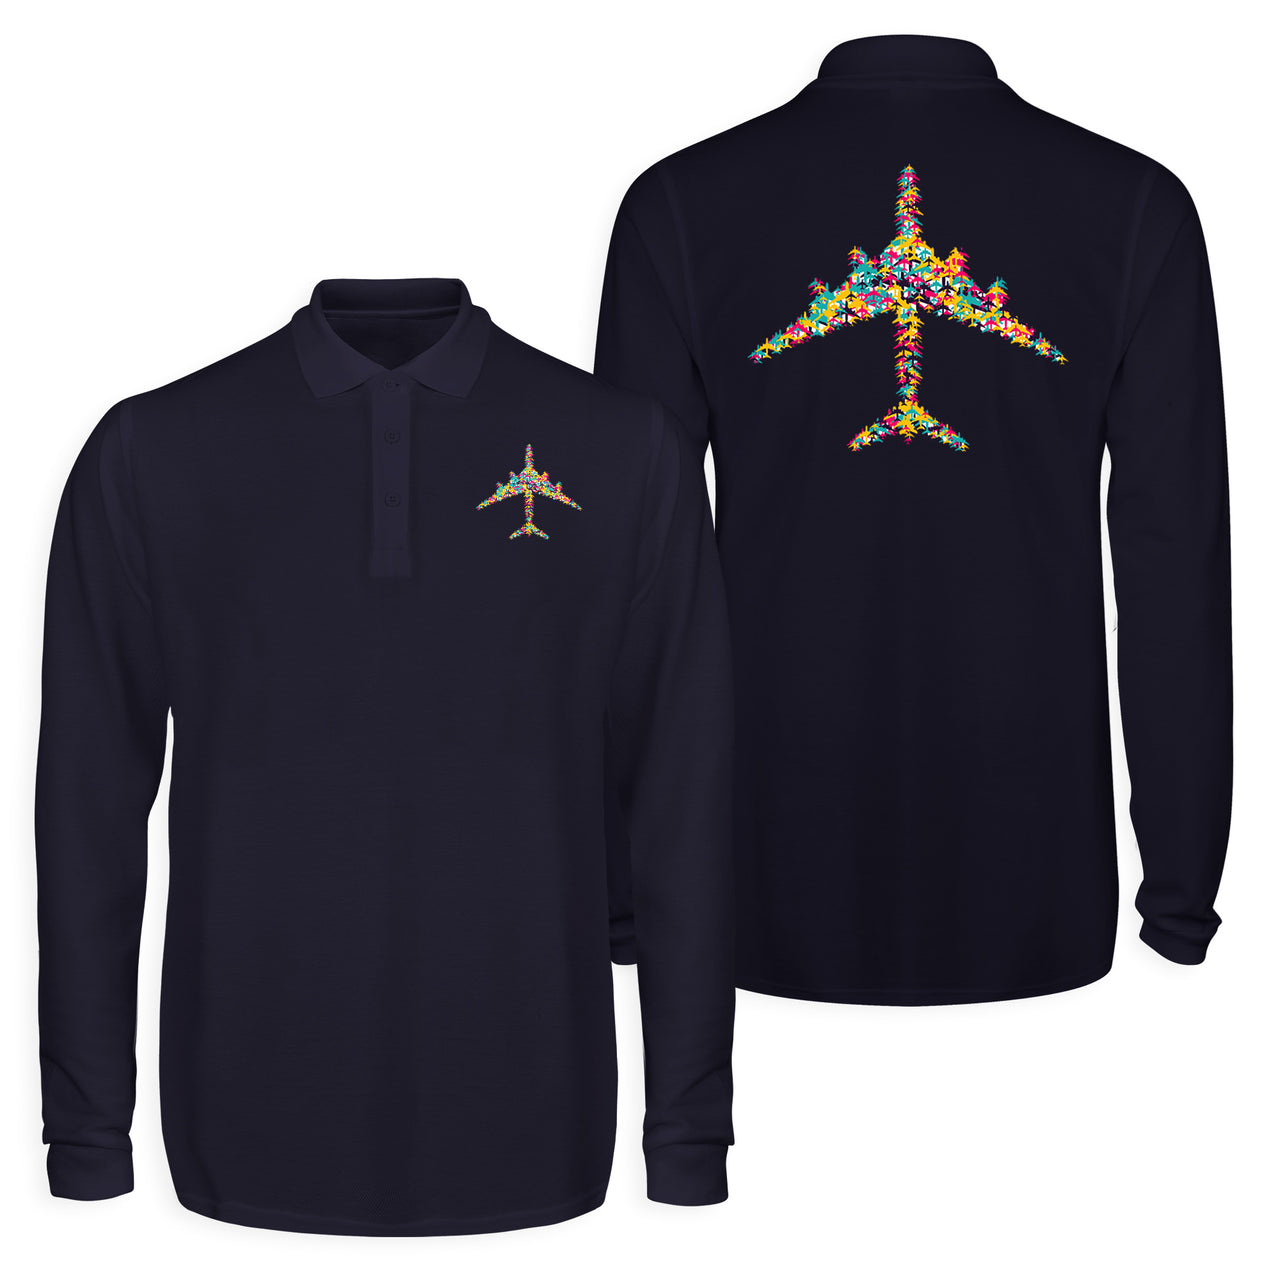 Colourful Airplane Designed Long Sleeve Polo T-Shirts (Double-Side)